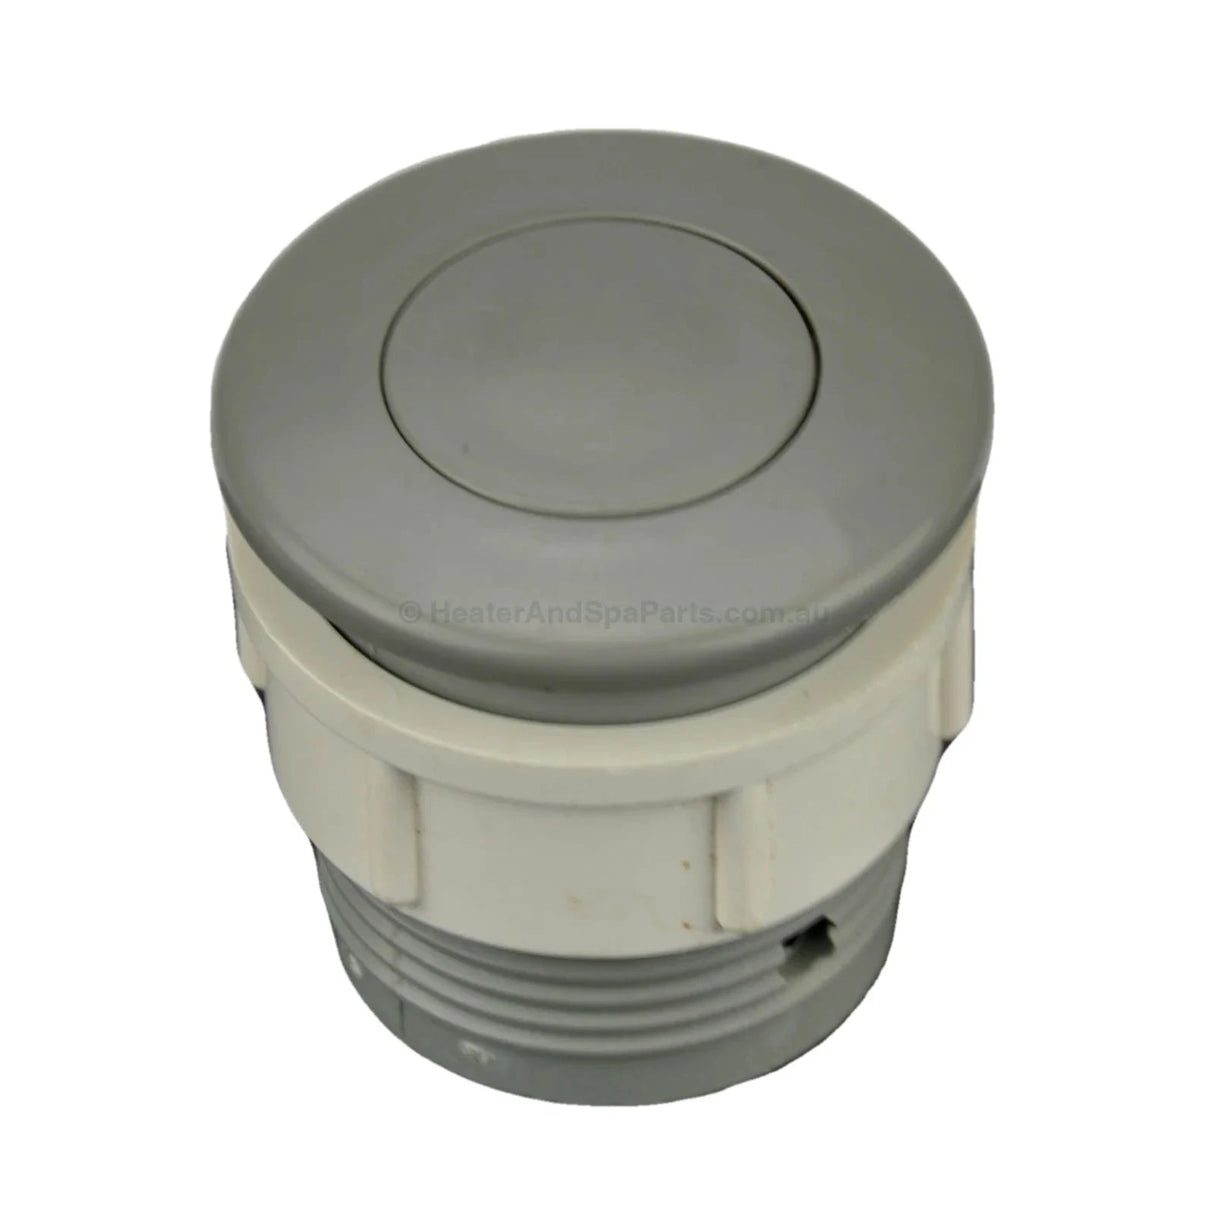 Waterway Spa & Spa Bath Air Button Switch - Heater and Spa Parts